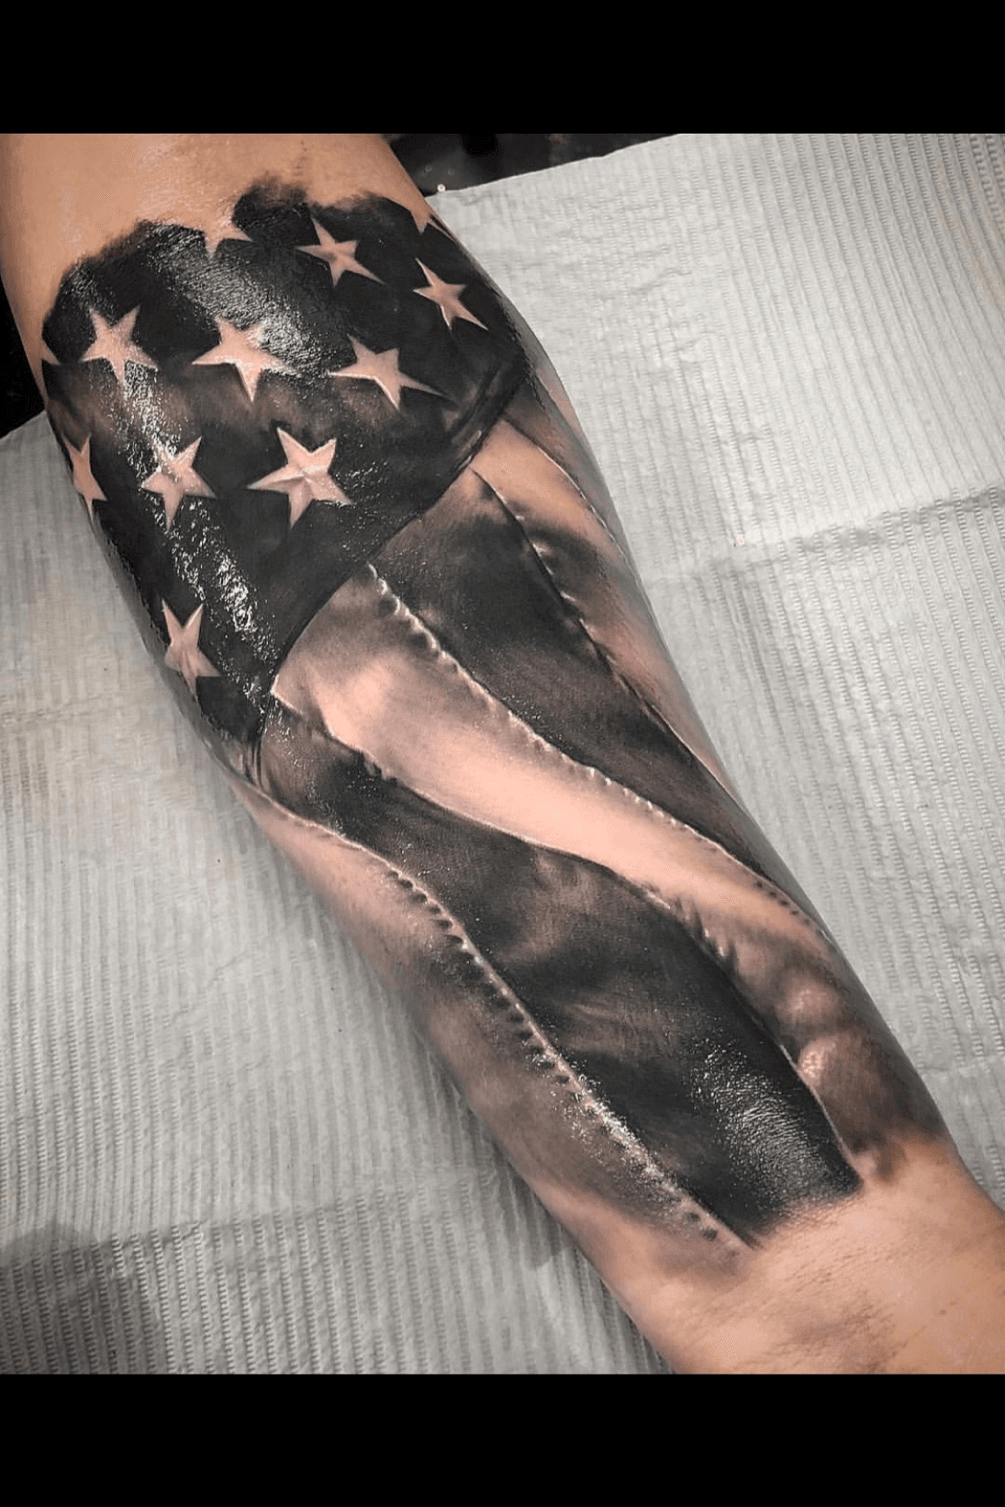 77 American Flag Tattoo Ideas To Show Your Patriotism